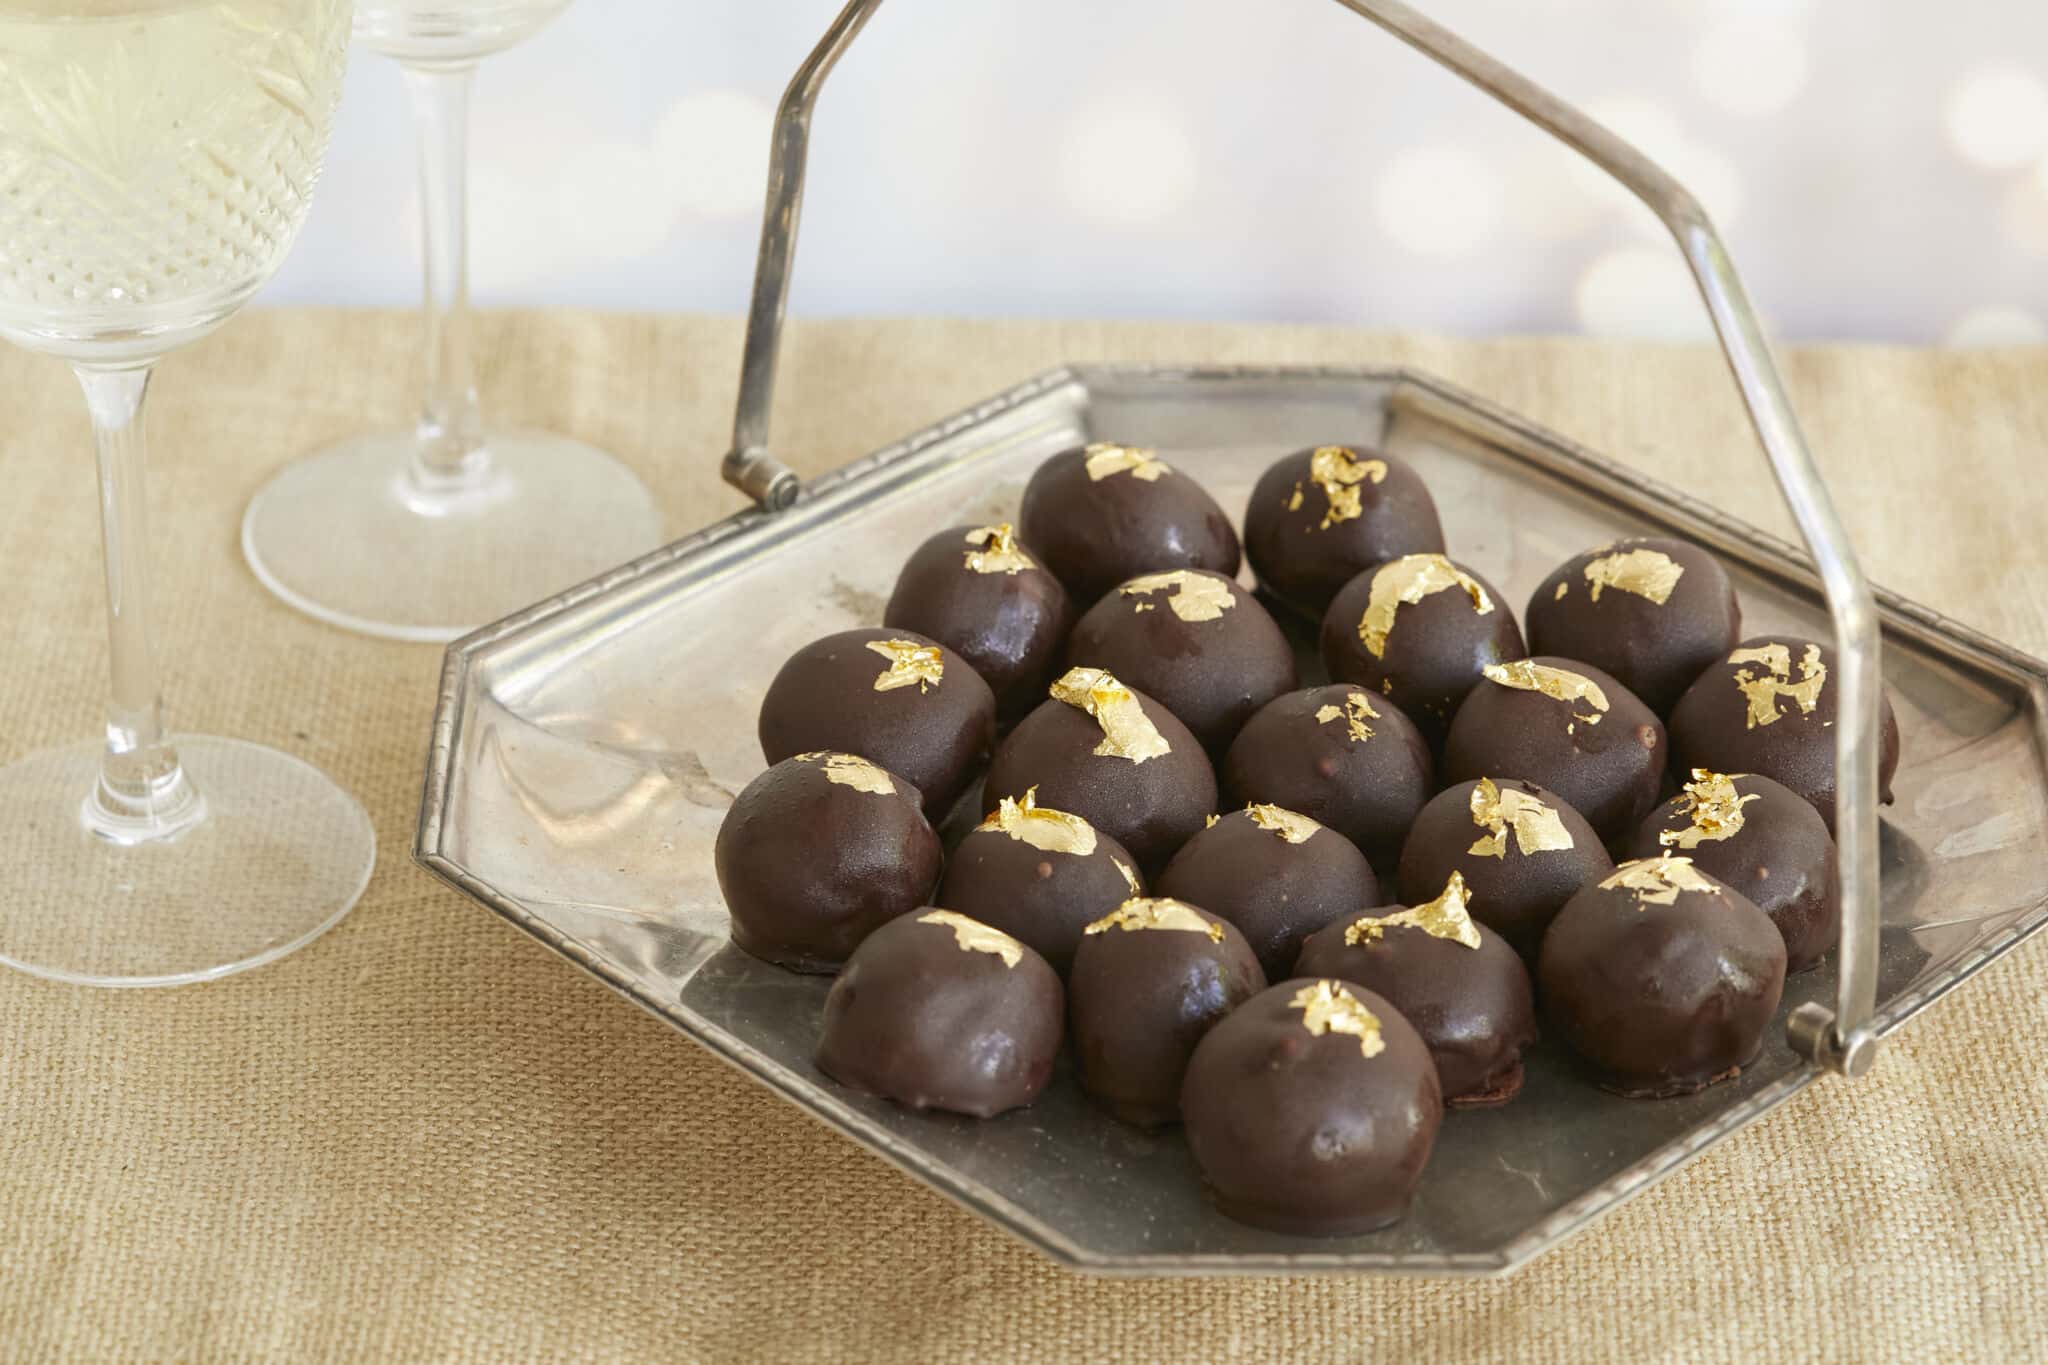 Heavenly Champagne Truffles are placed on a silver platter with a handle. they have bittersweet chocolate shells and are decorated with edible gold leaves. Two glasses of champagne are served on the side.